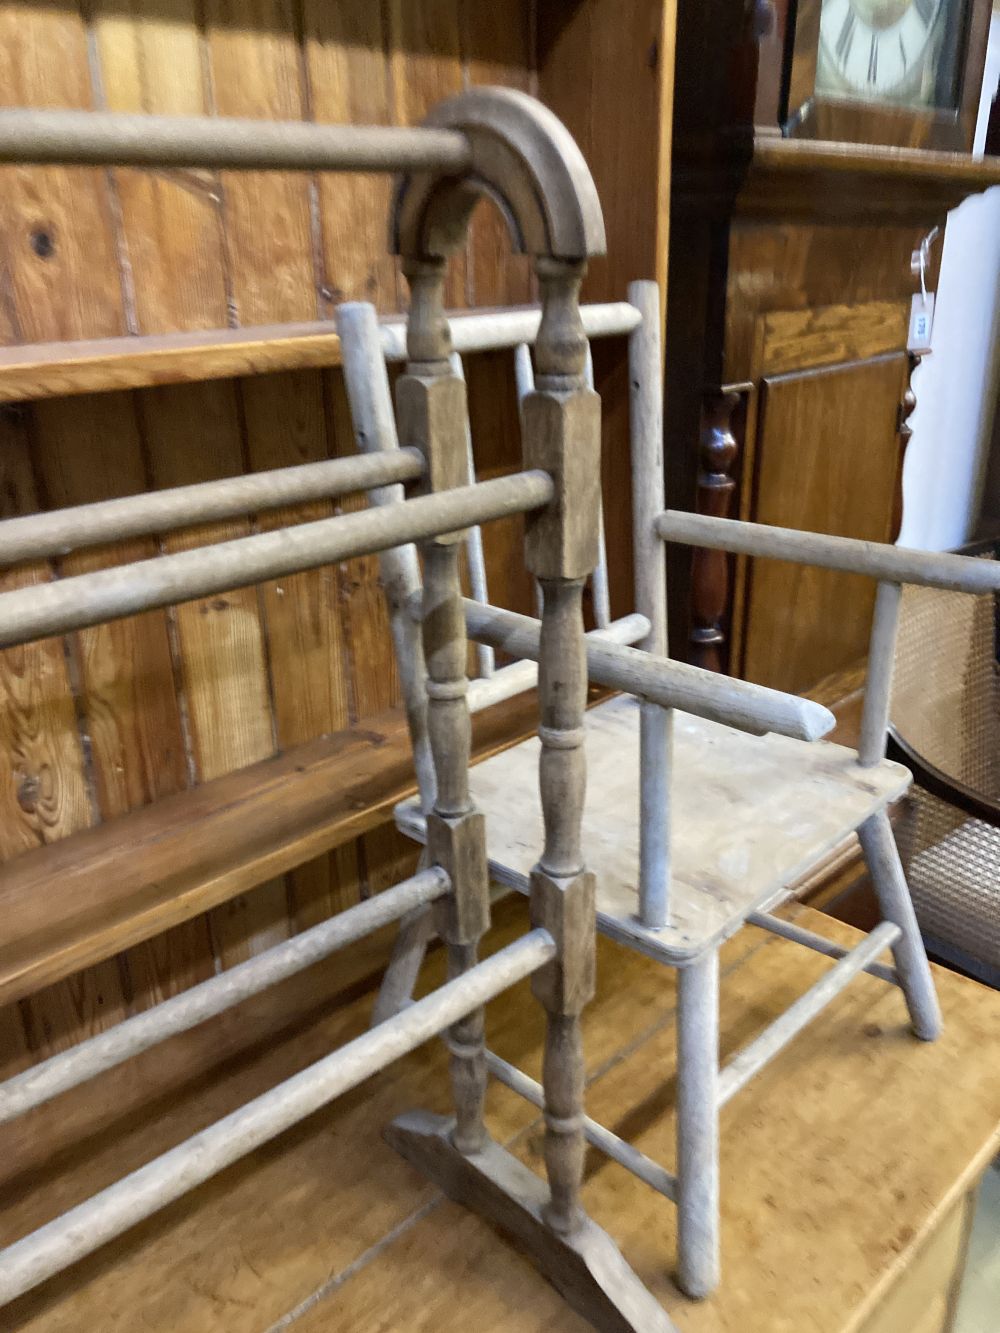 A Victorian towel rail, a primitive childs elbow chair and a metamorphic chair